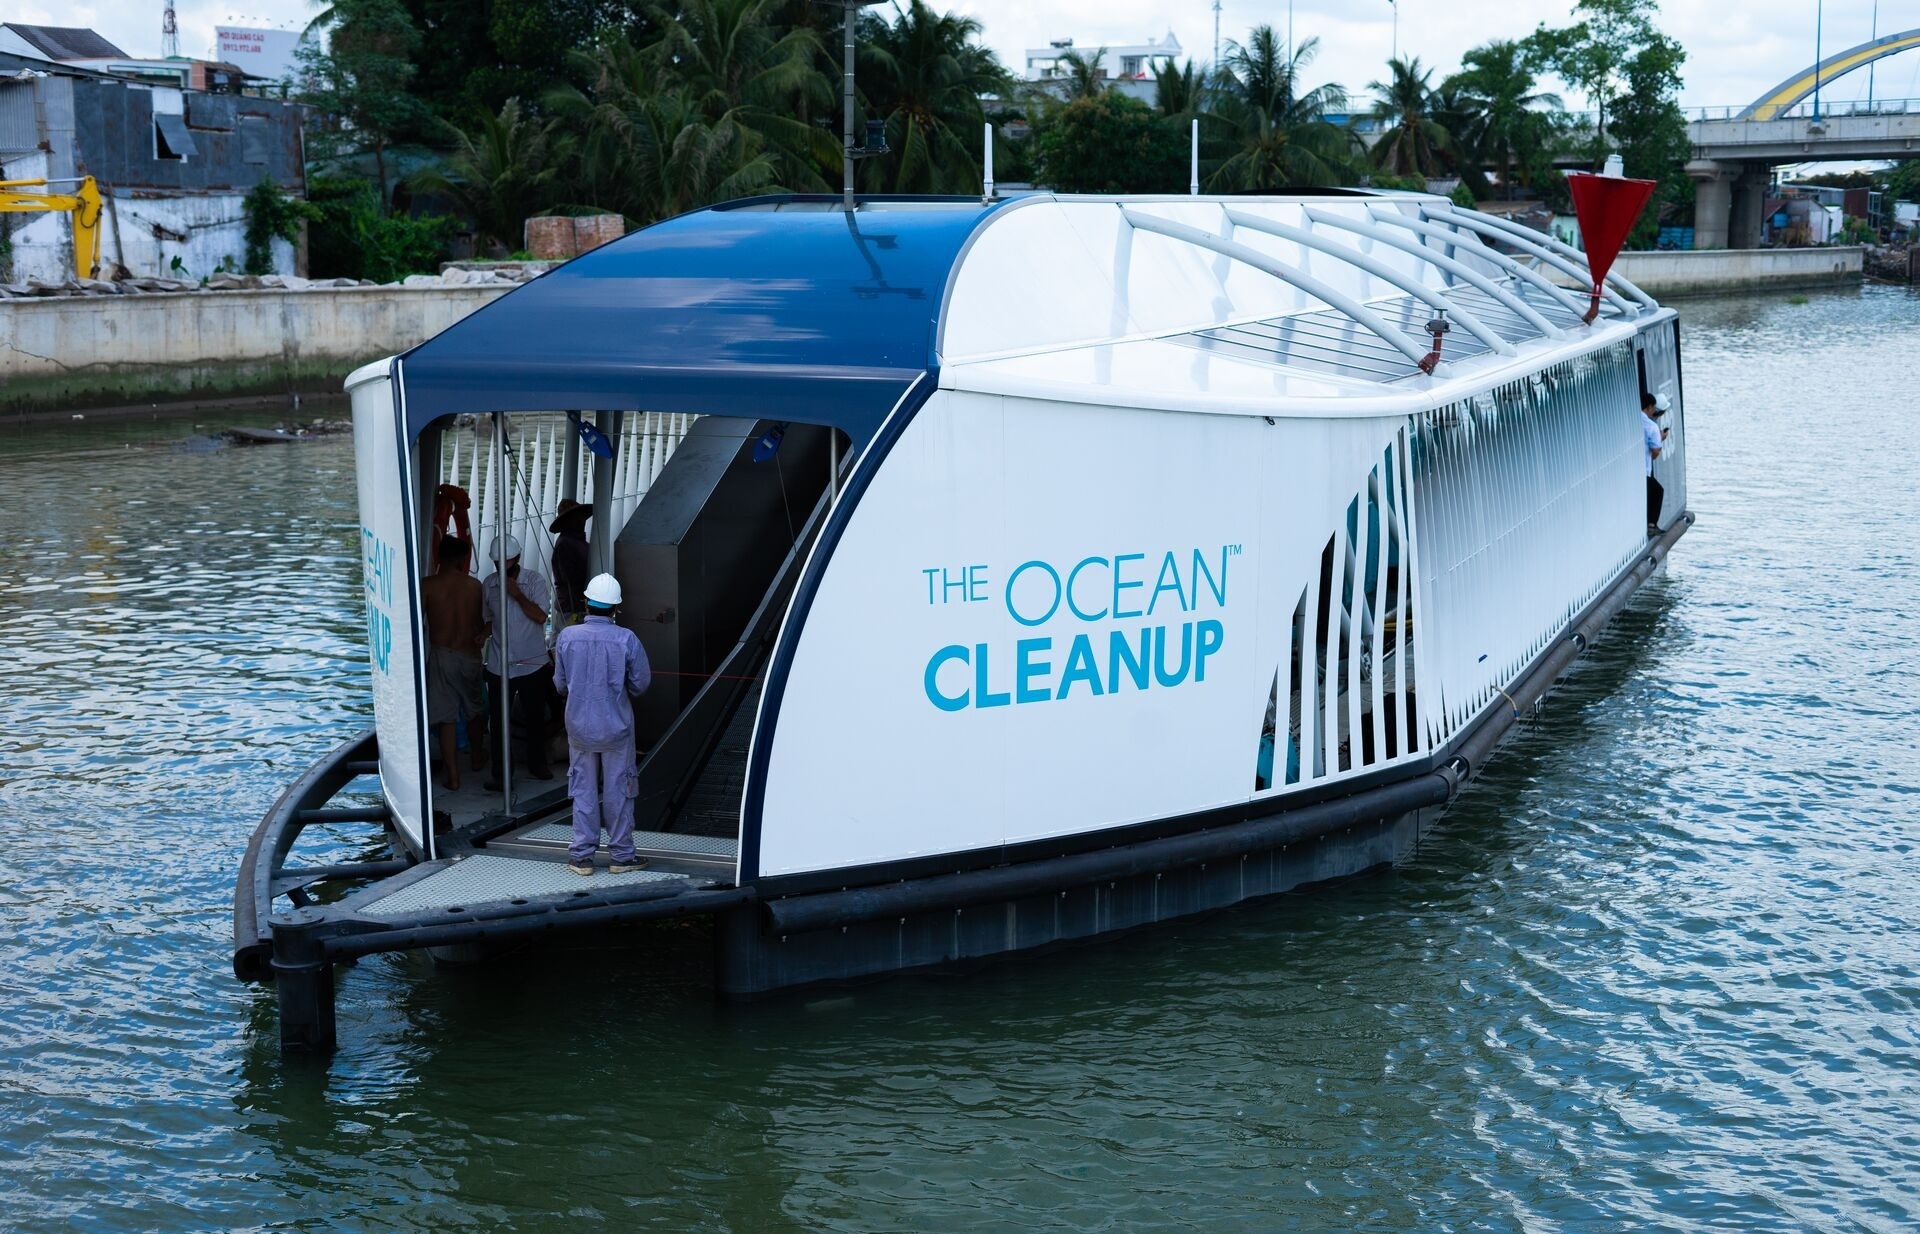 The Coca-Cola Company and The Ocean Cleanup participate in Vietnam’s plastic pollution prevention